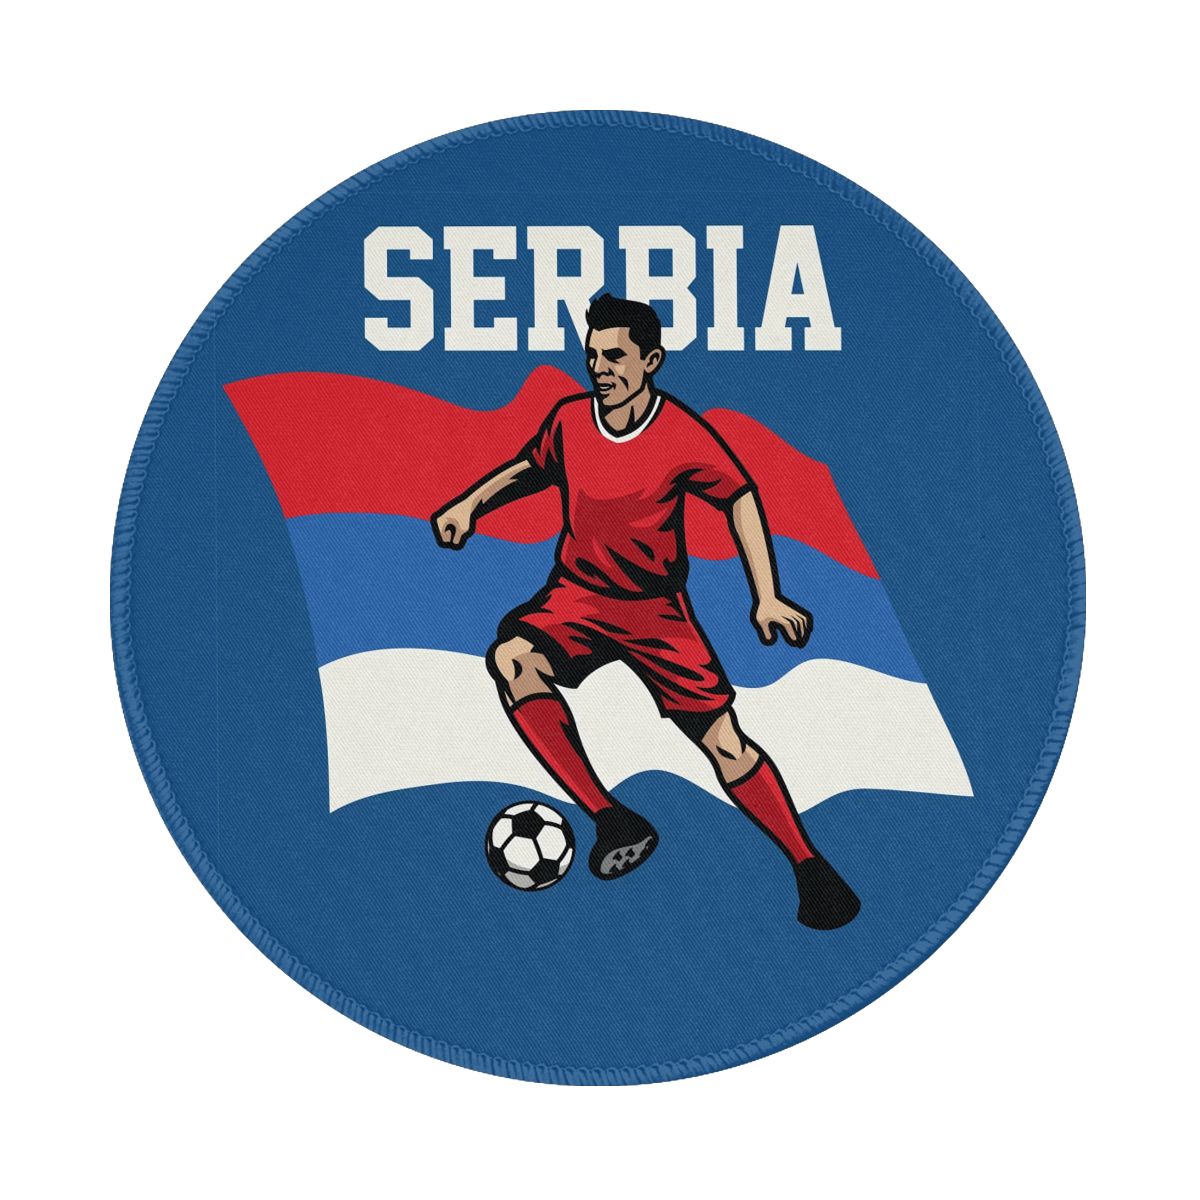 Serbia Soccer Player Gaming Round Mousepad for Computer Laptop